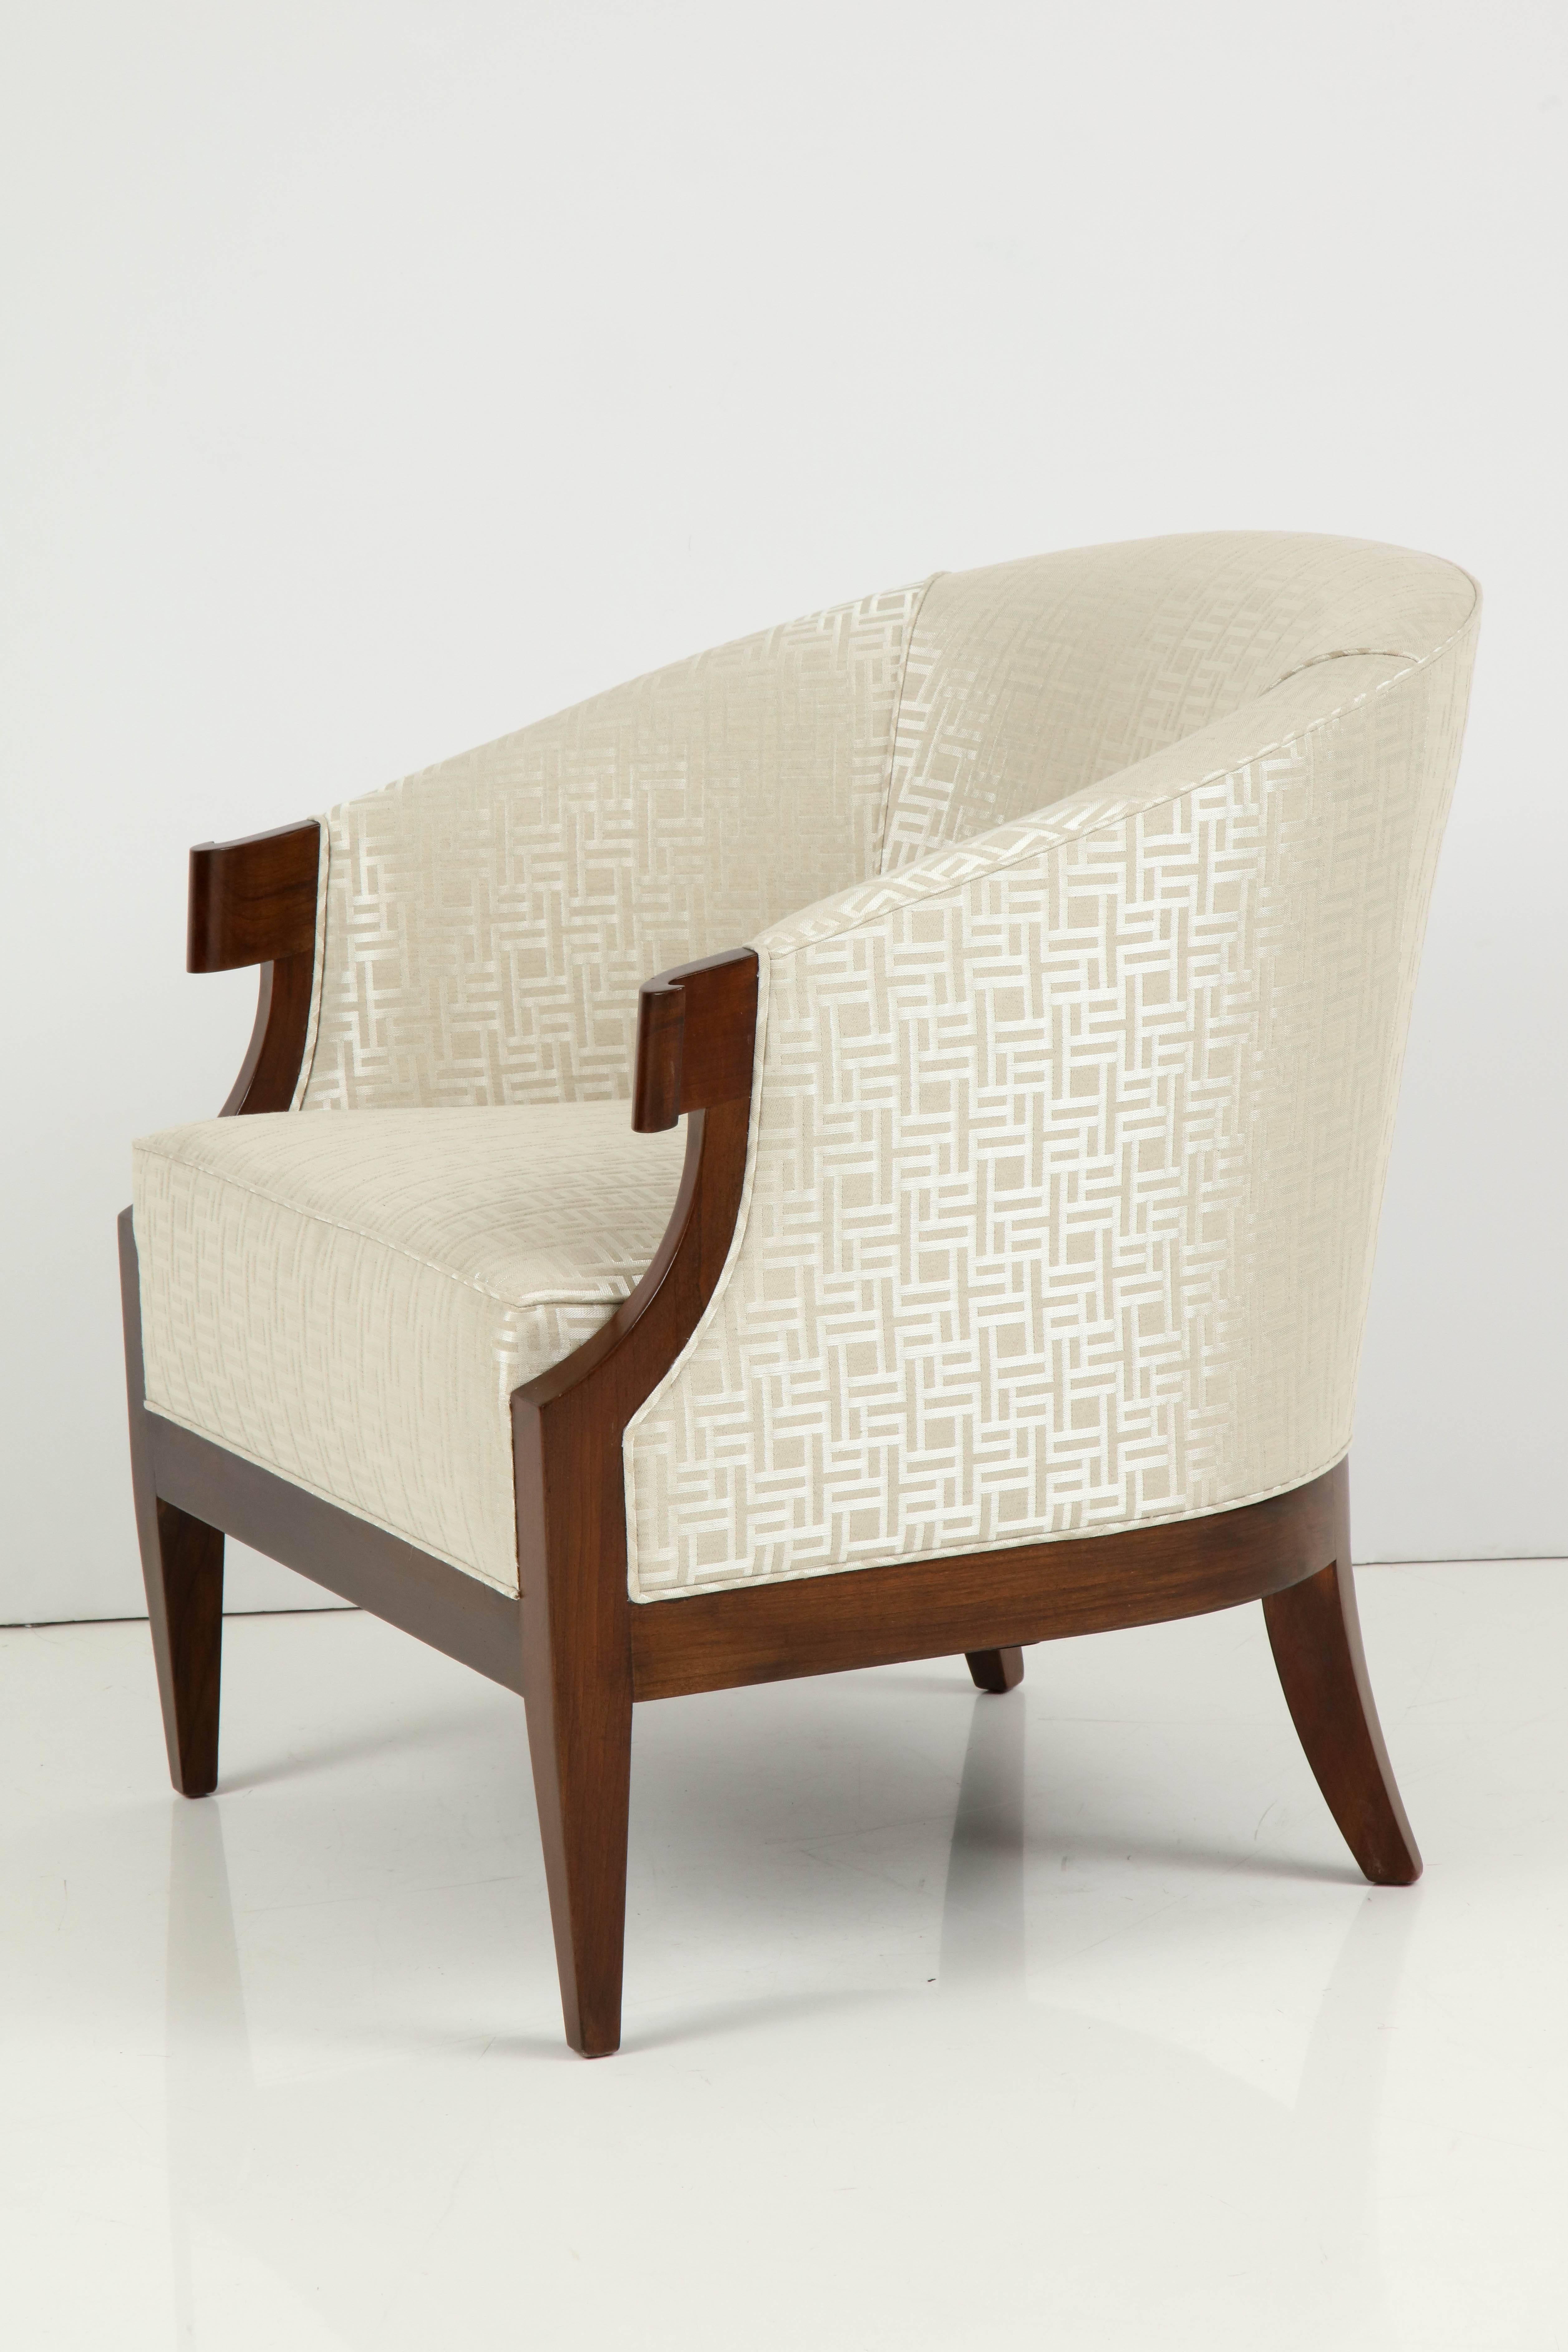 Pair of midcentury, Continental collection club chairs designed by Winsor White/ William Millington for Baker Furniture. Chairs feature Walnut frames and have been upholstered in a heavy graphic silk/cotton/linen upholstery from ROMO. Mint restored